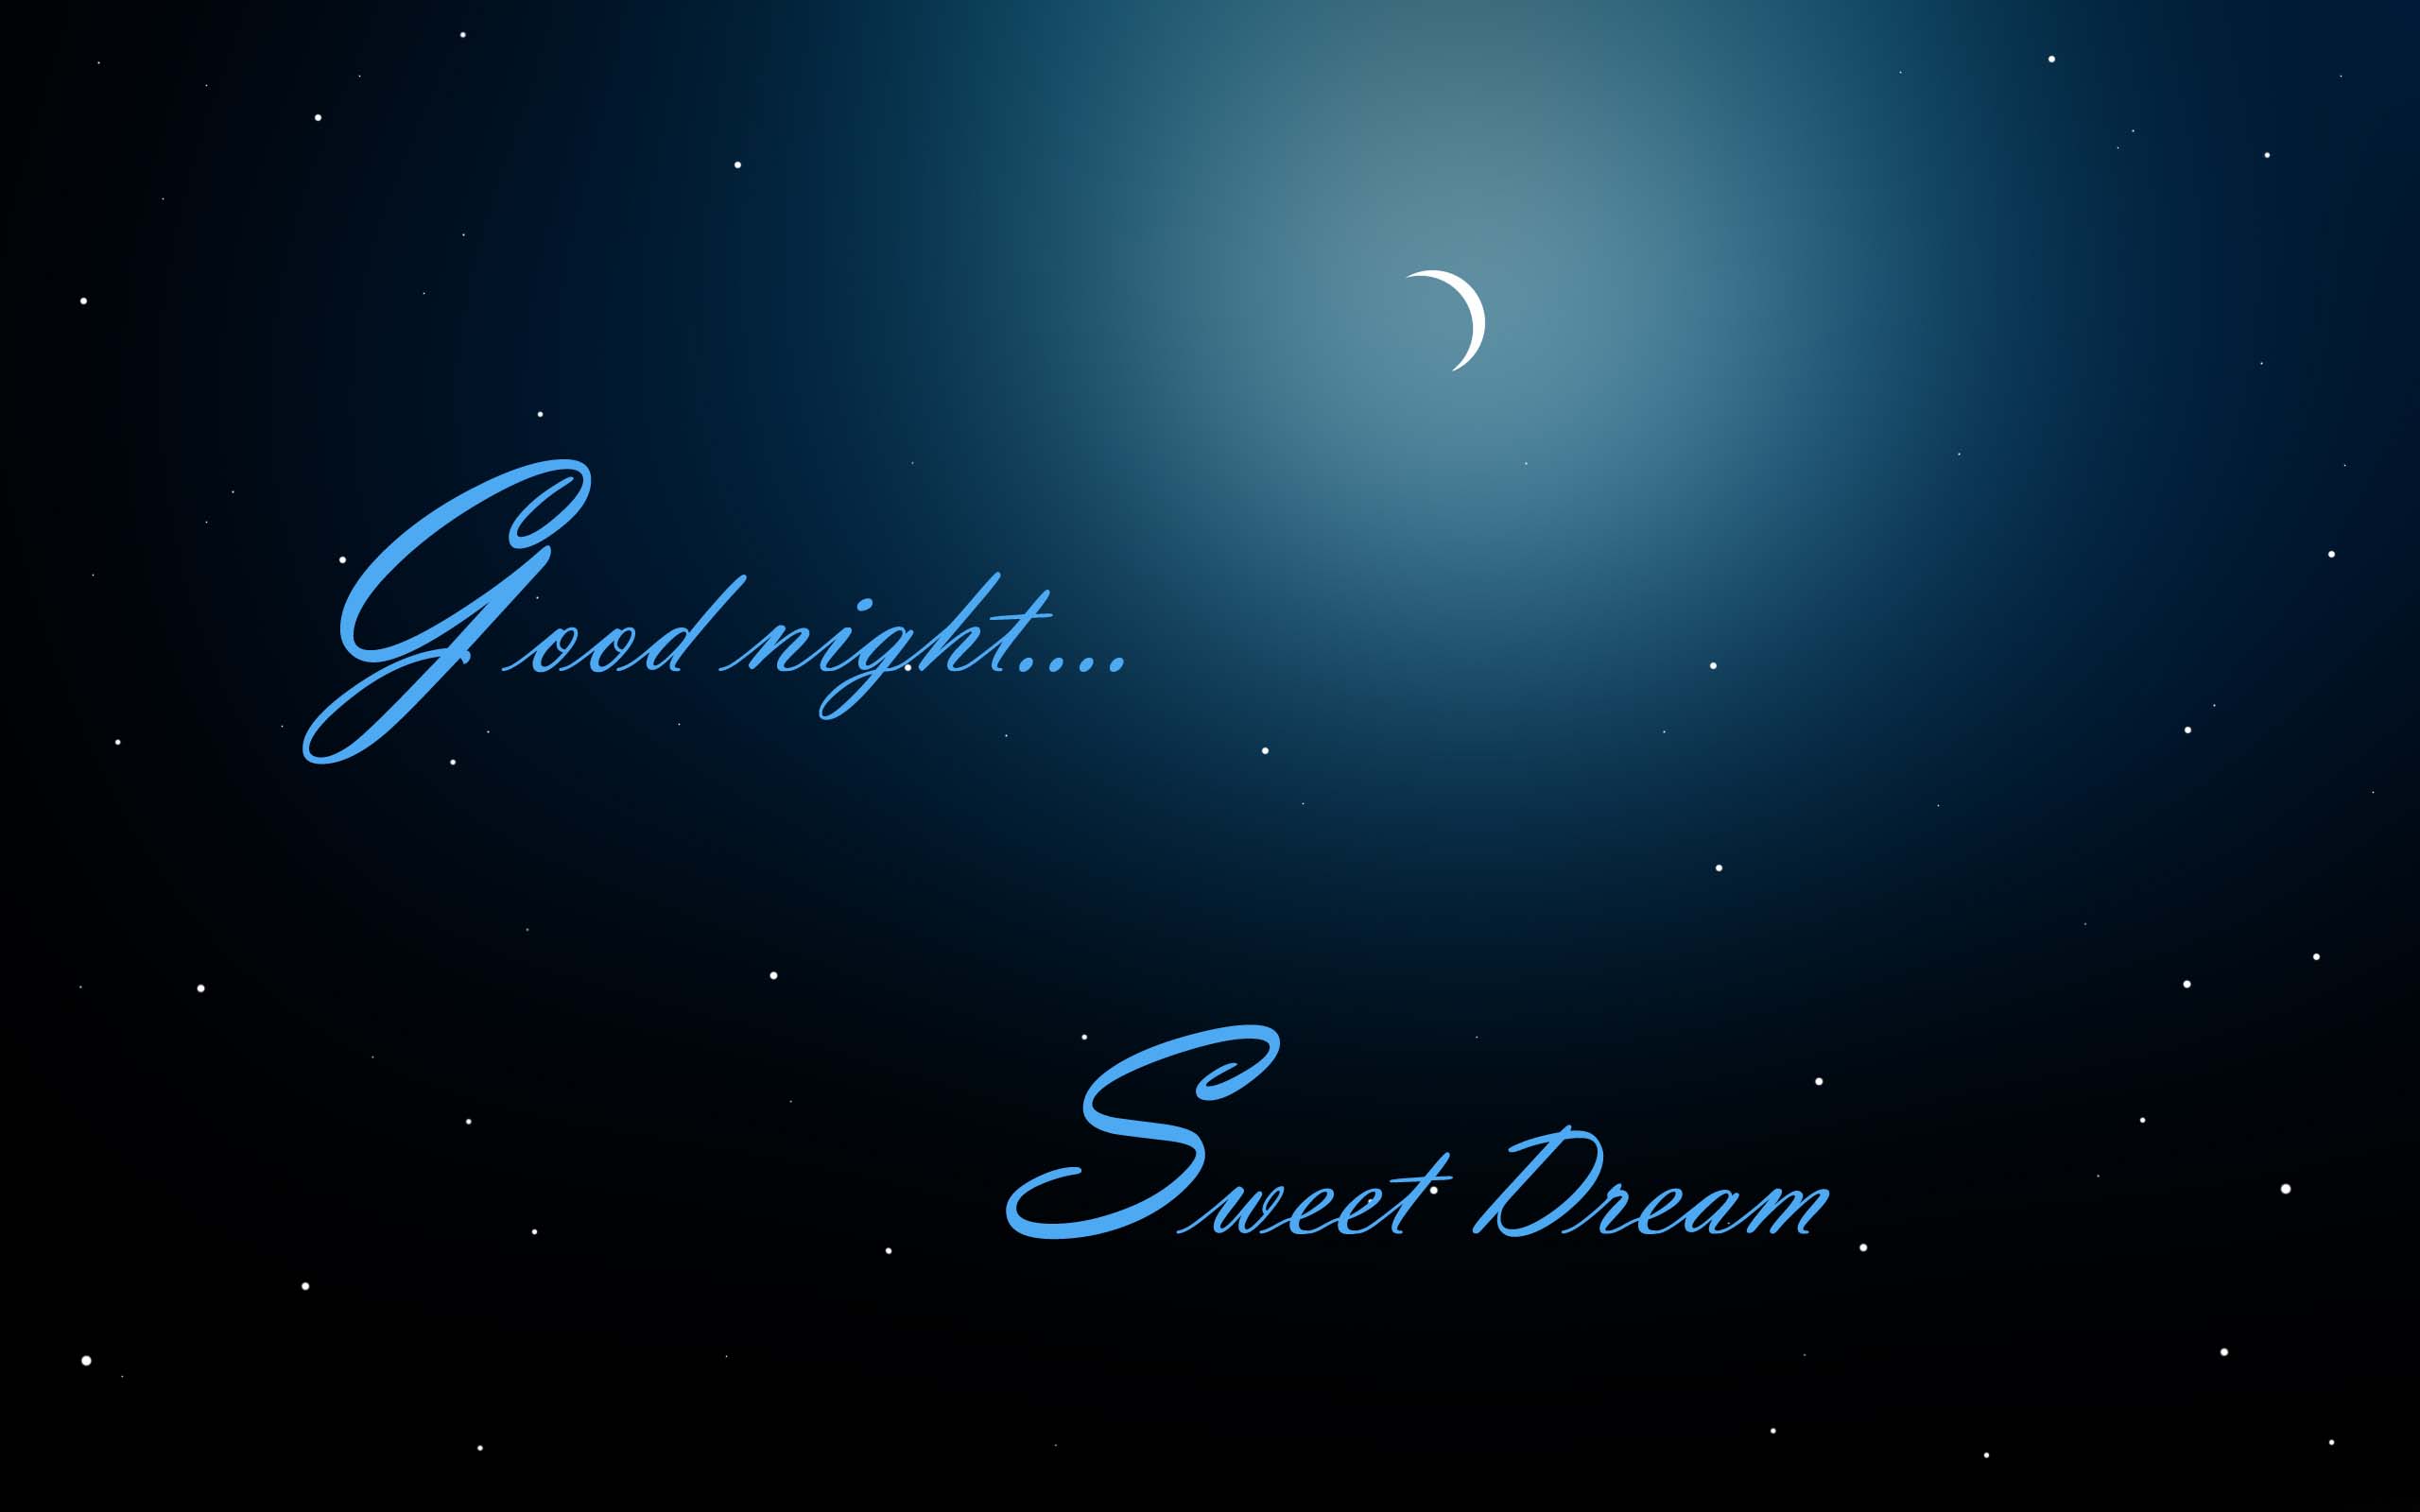 Sweet dreams pictures good night